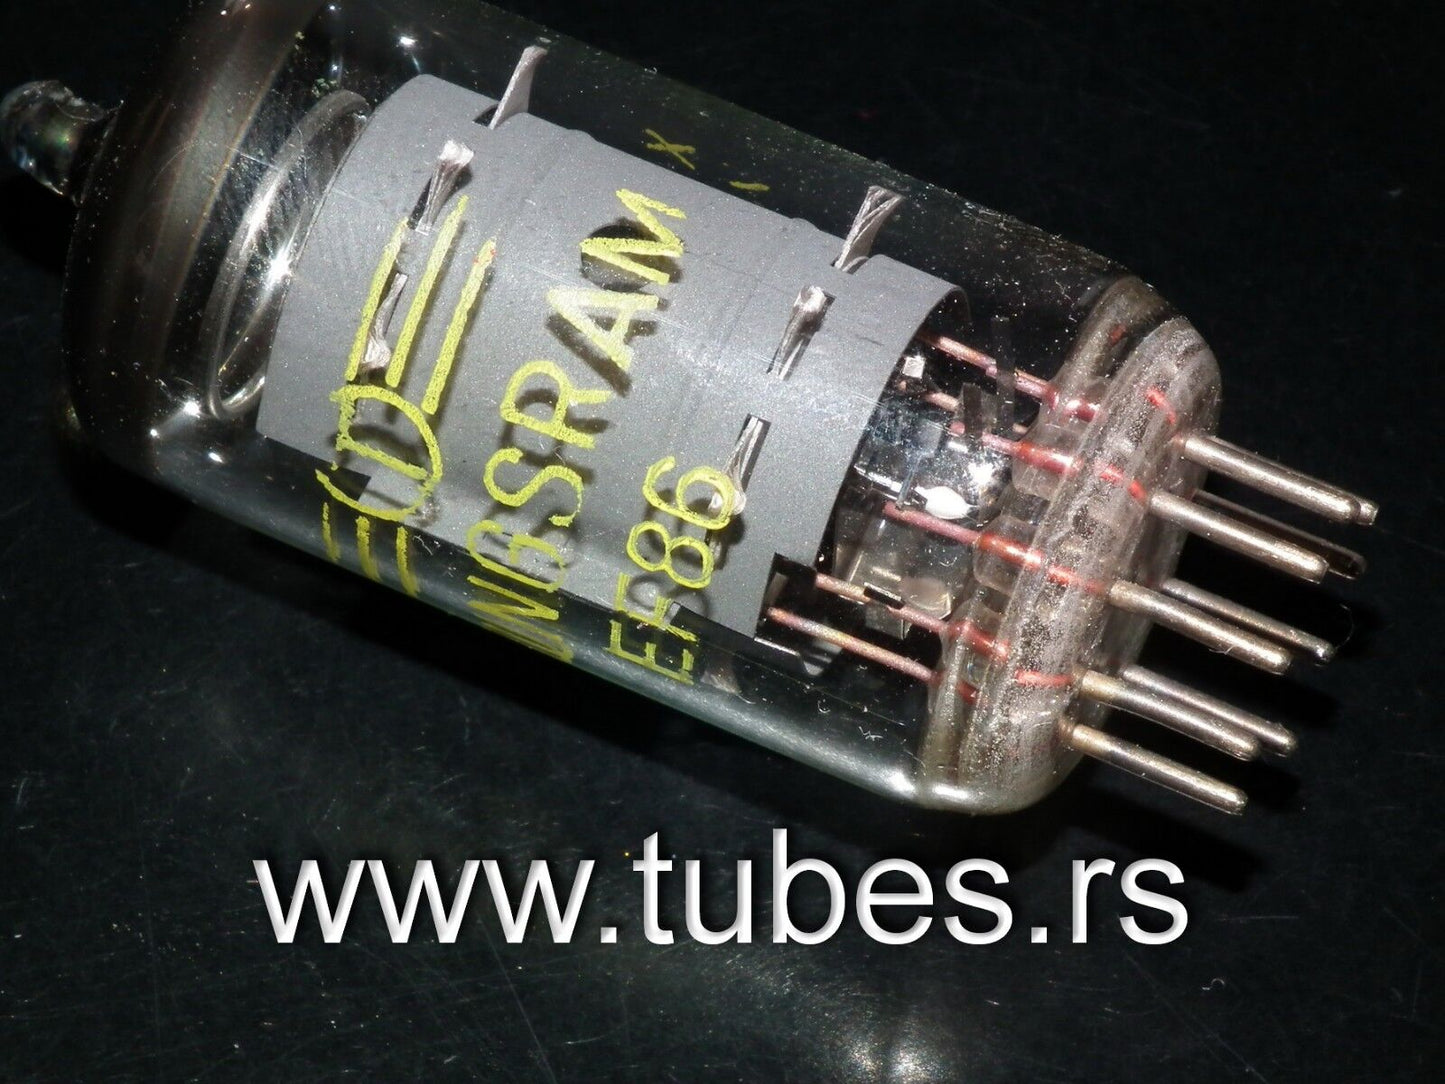 EF86 Tungsram, used, tested 100% in white box, NOS test results